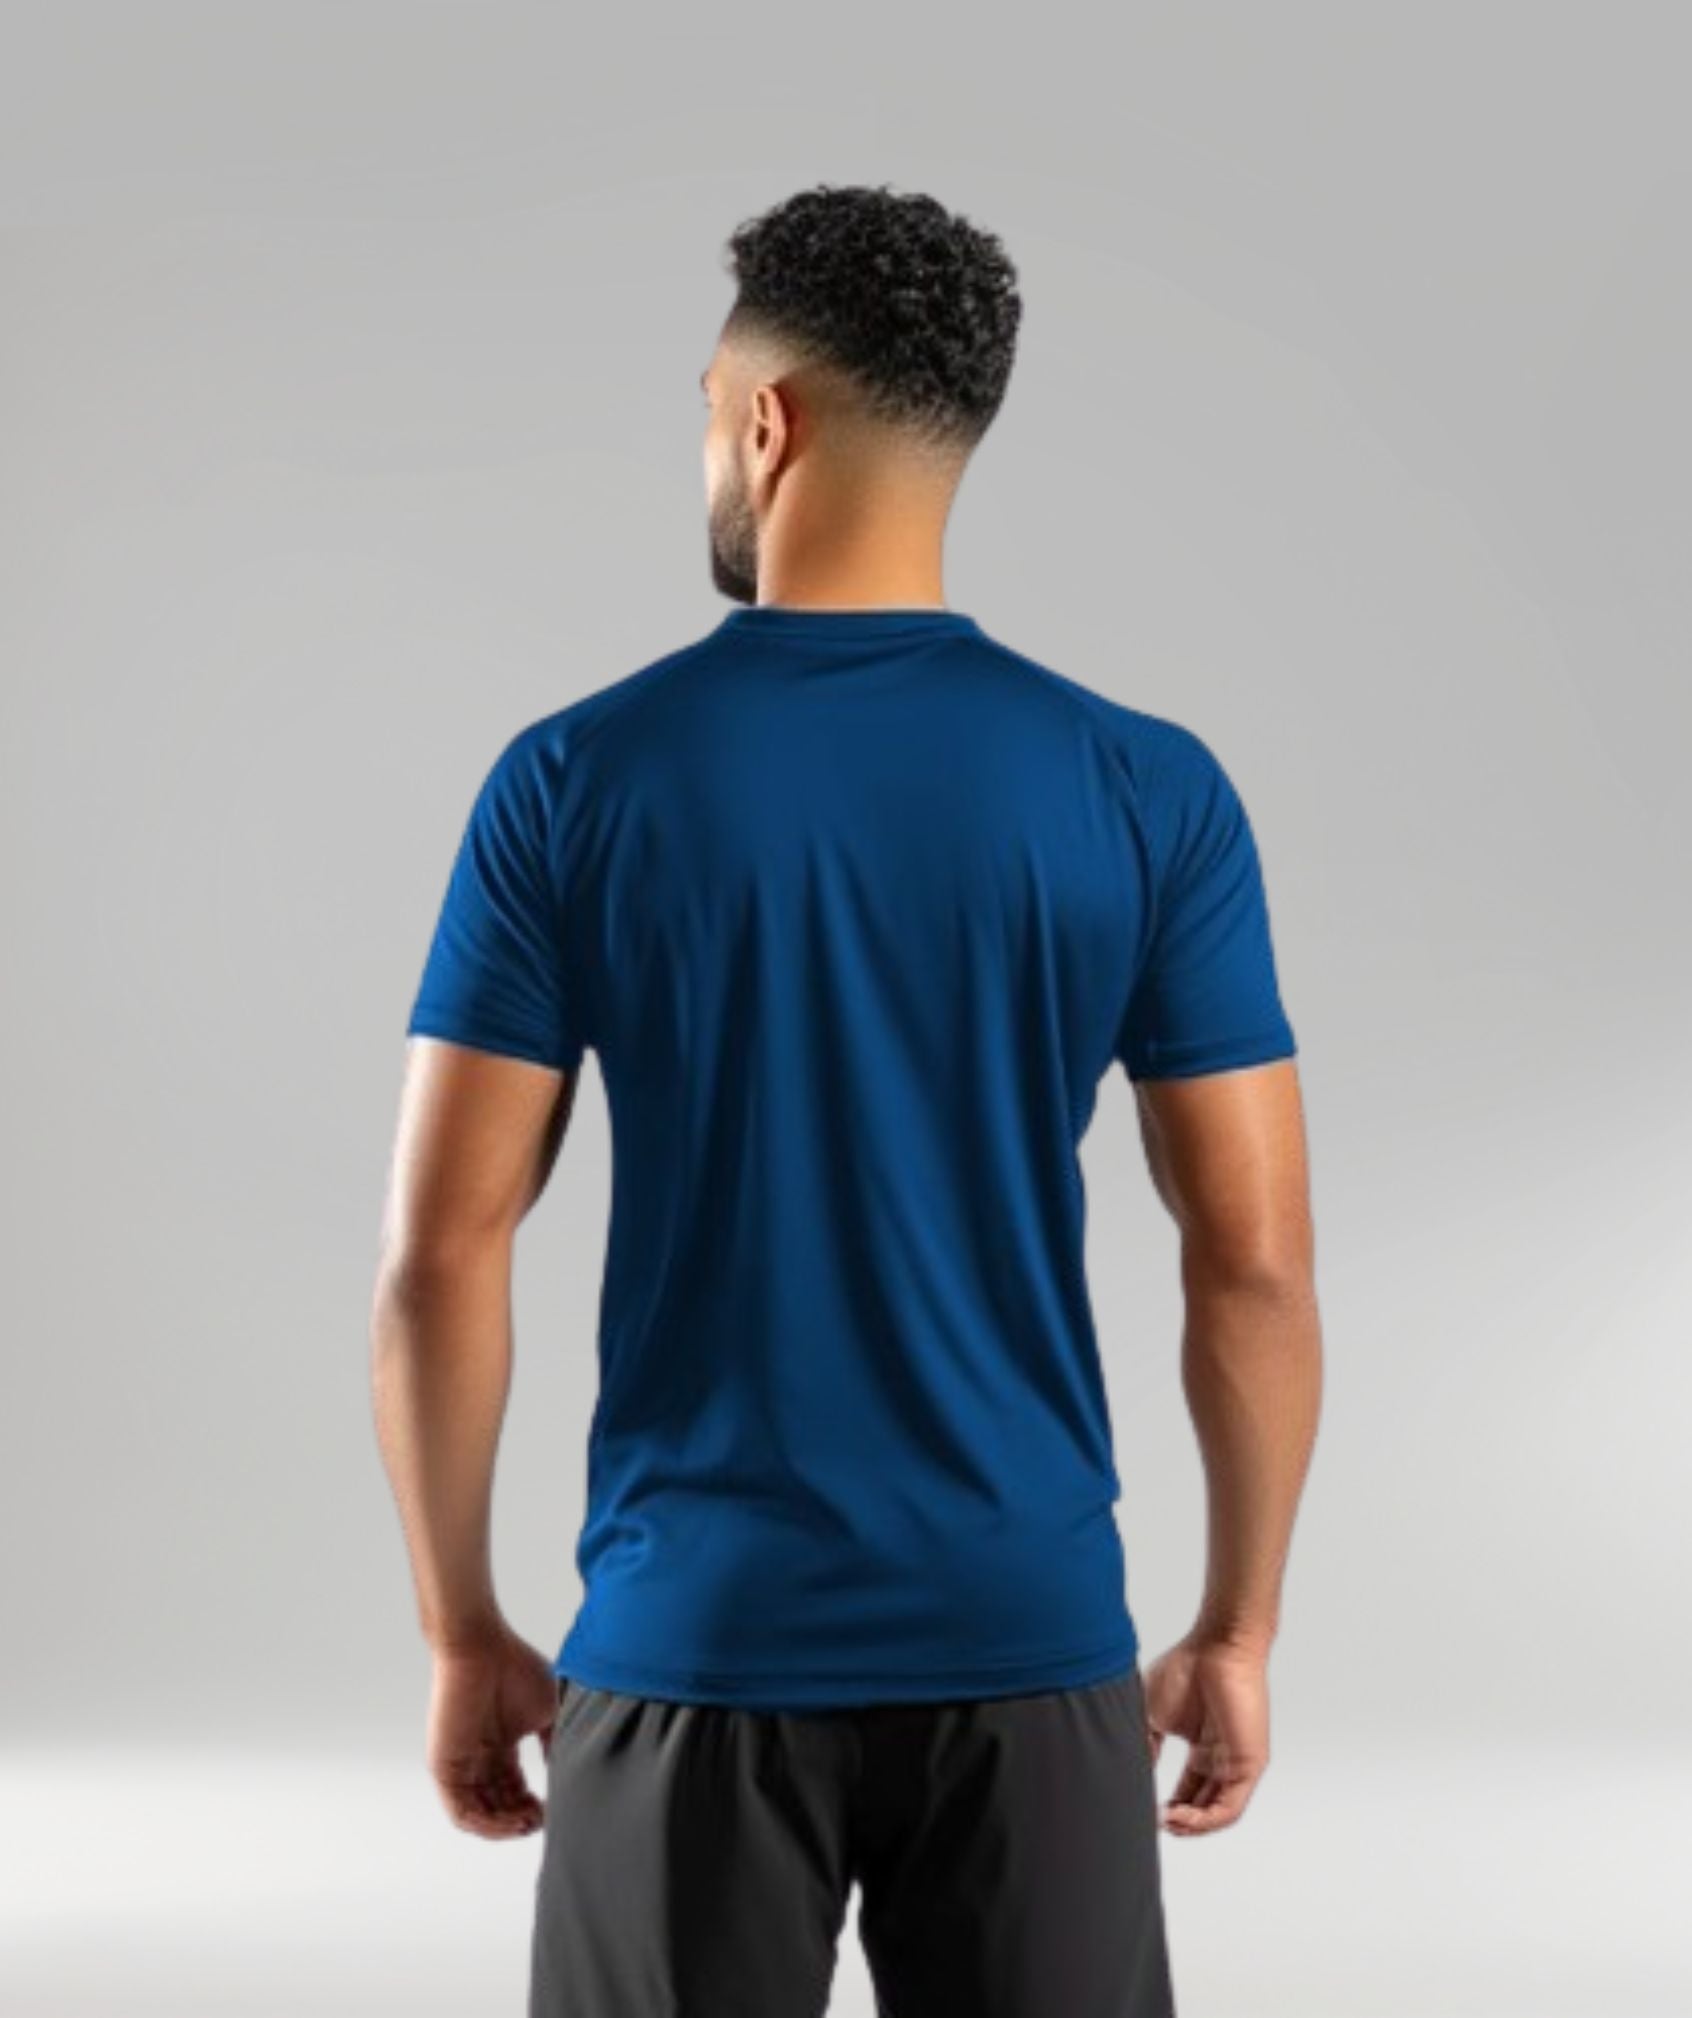 activewear in royal blue - high-performance eco-friendly clothing